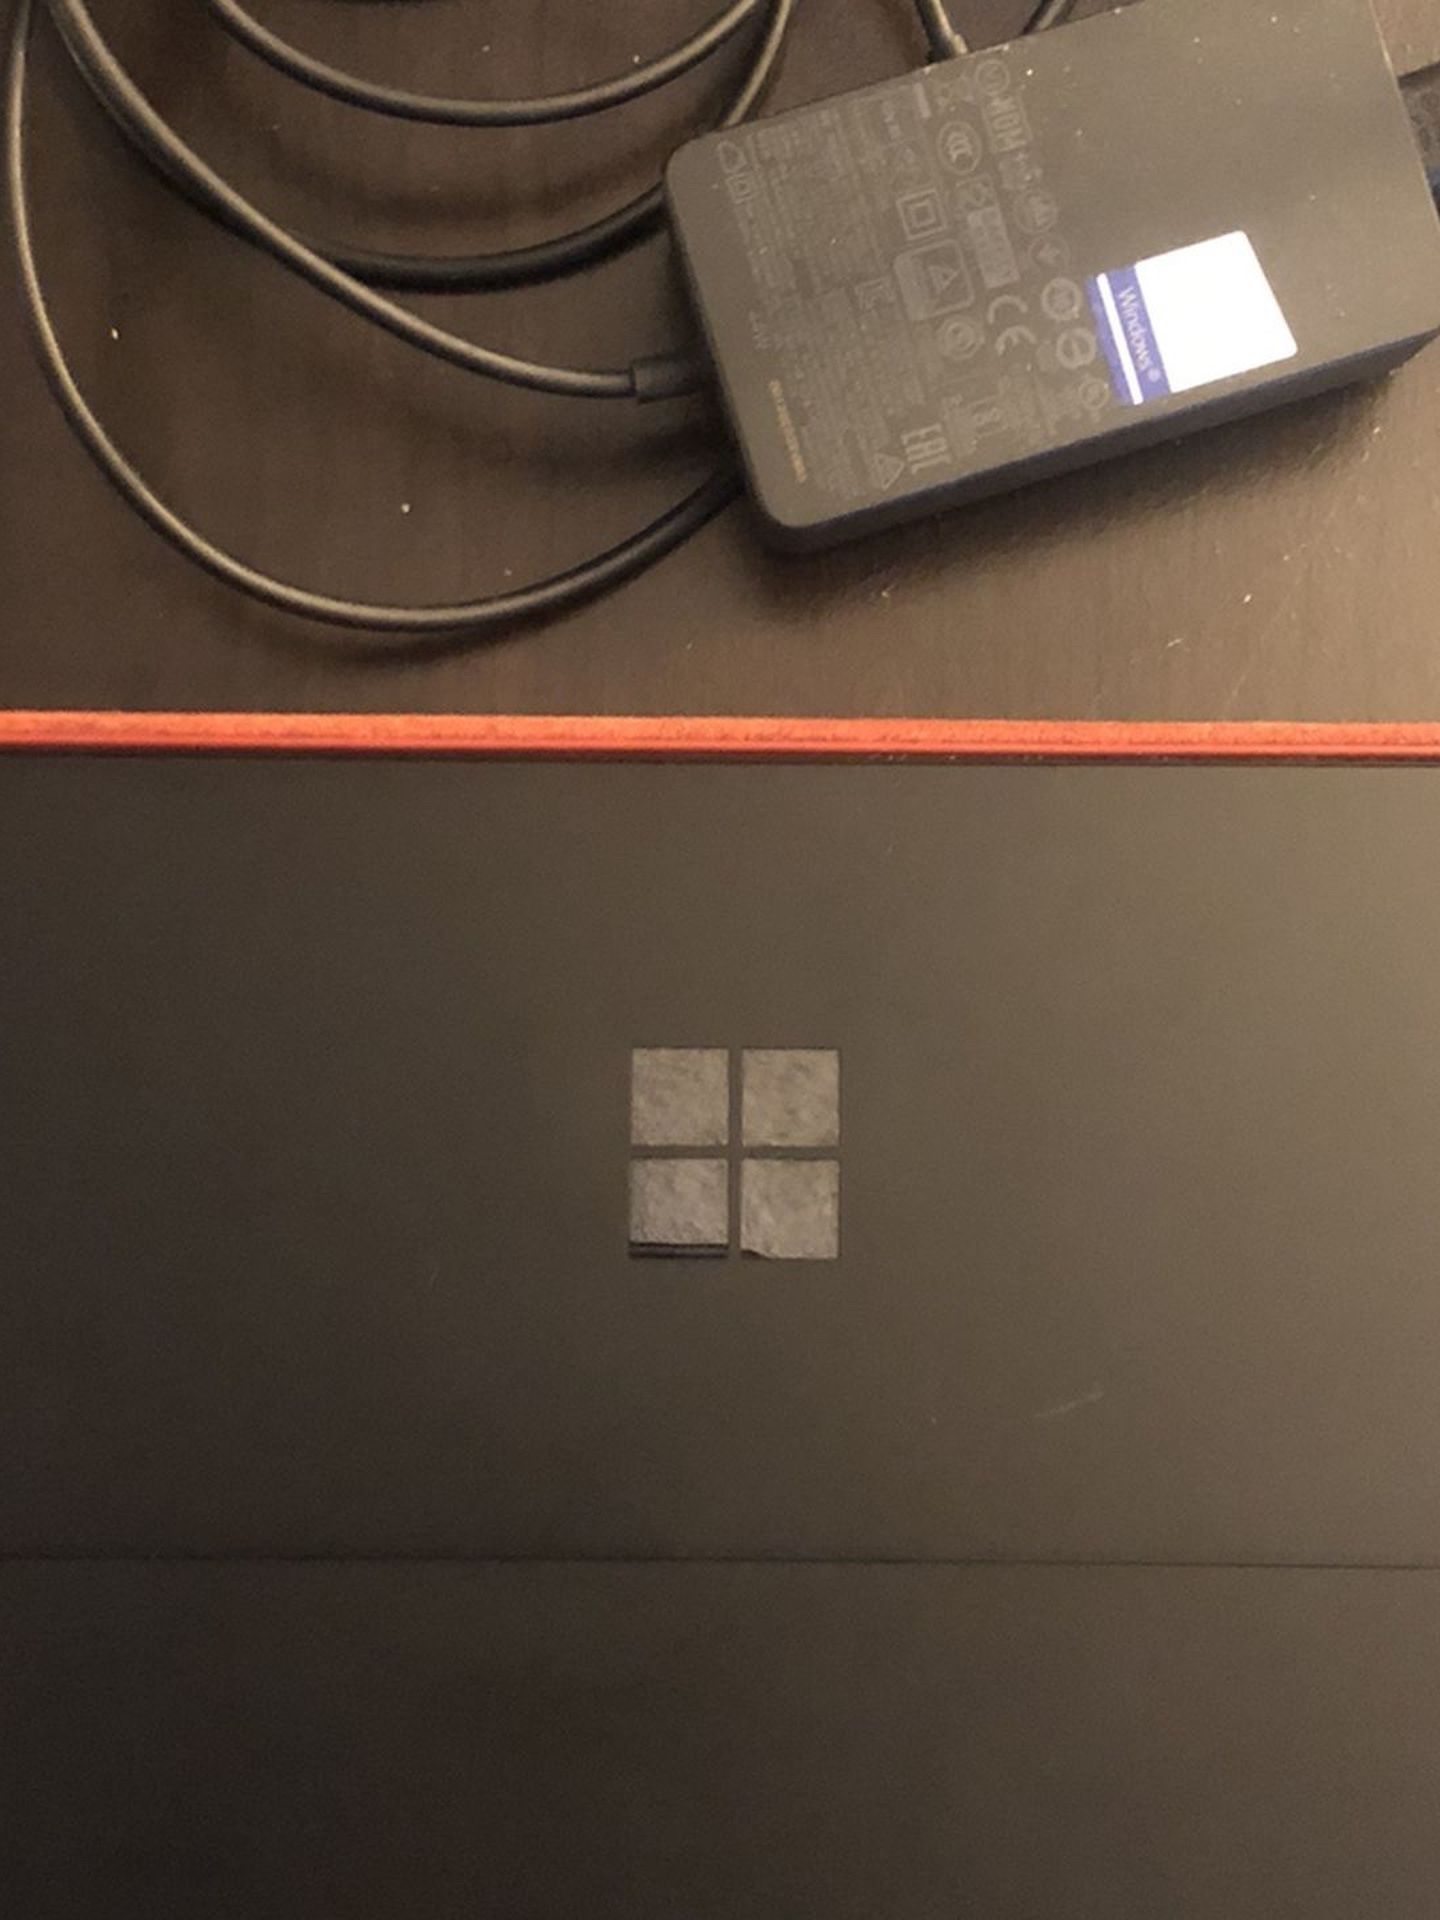 Barely Used Microsoft Surface Pro 6 - 8GB